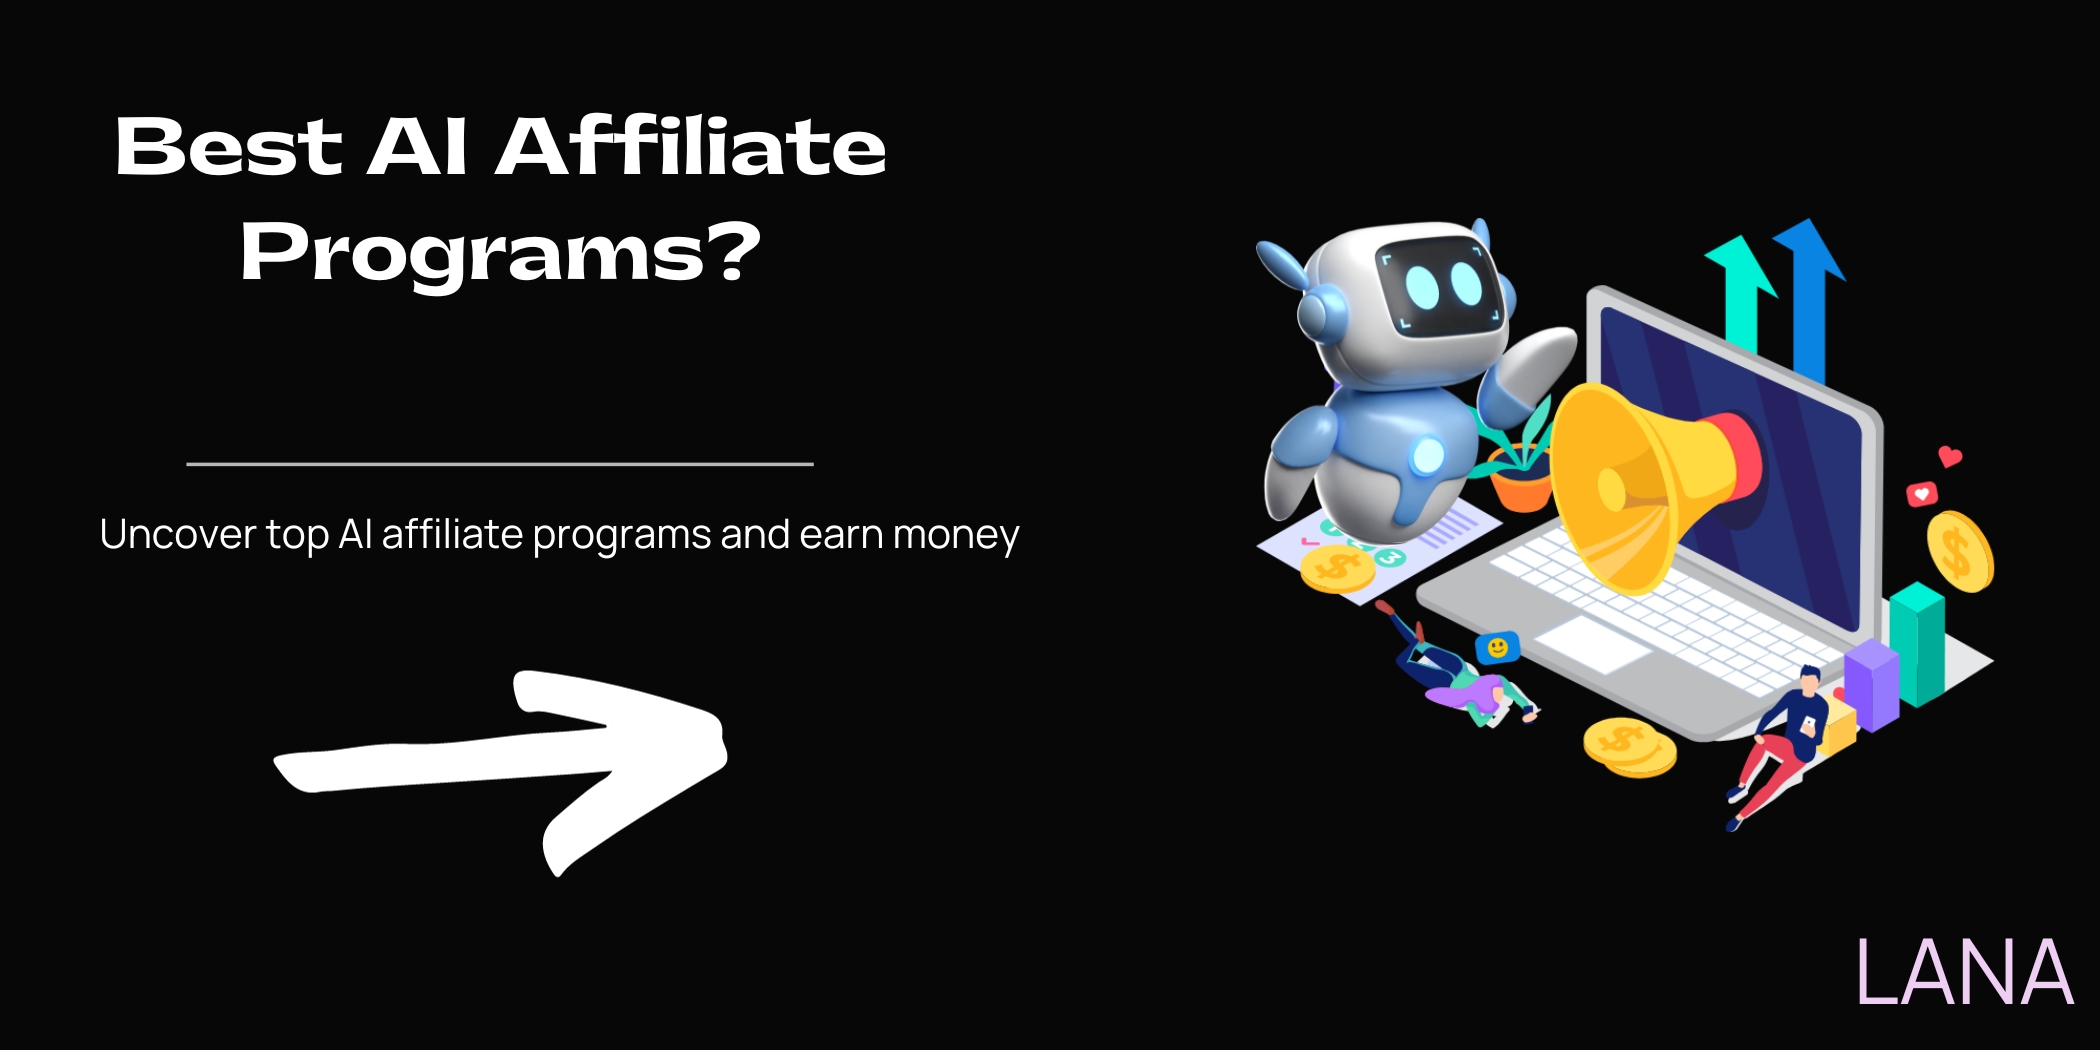 What are the Best AI Affiliate Programs